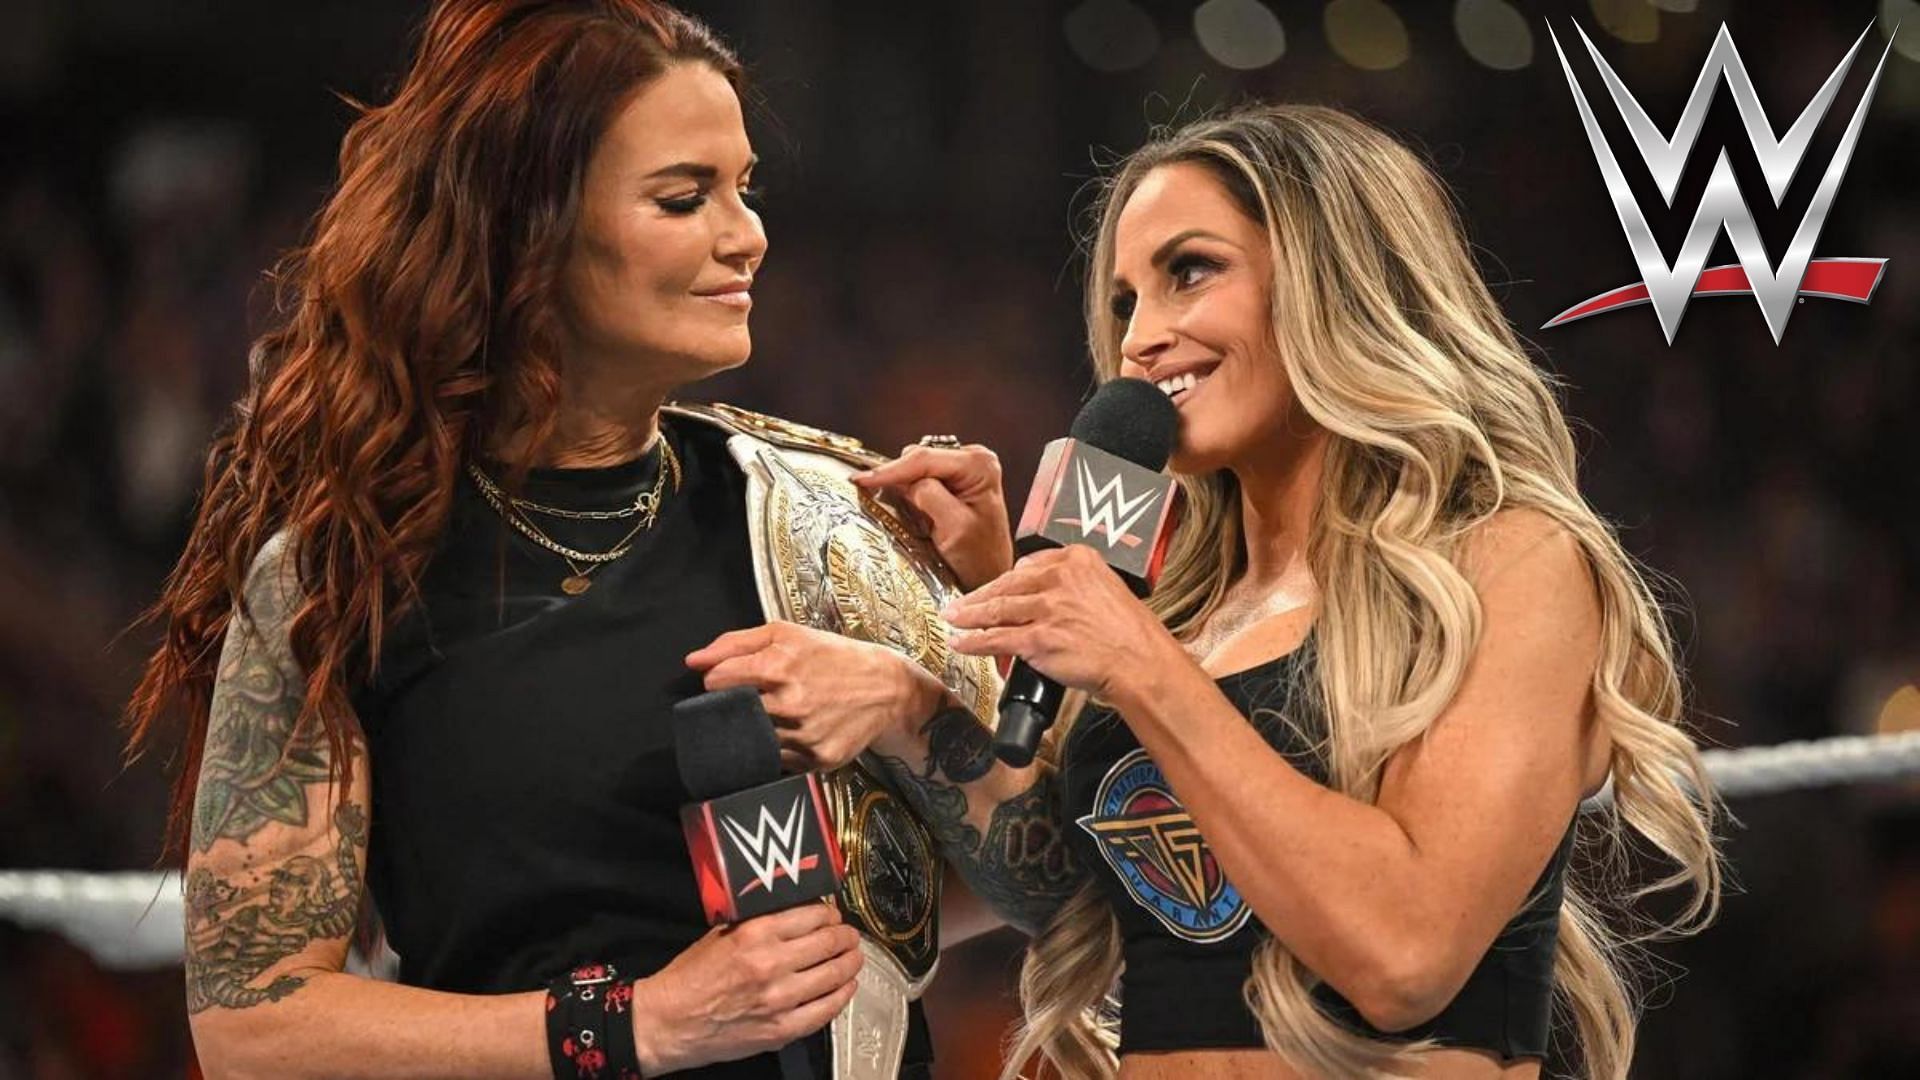 Trish Stratus and Lita are some of the most recognizable names in WWE